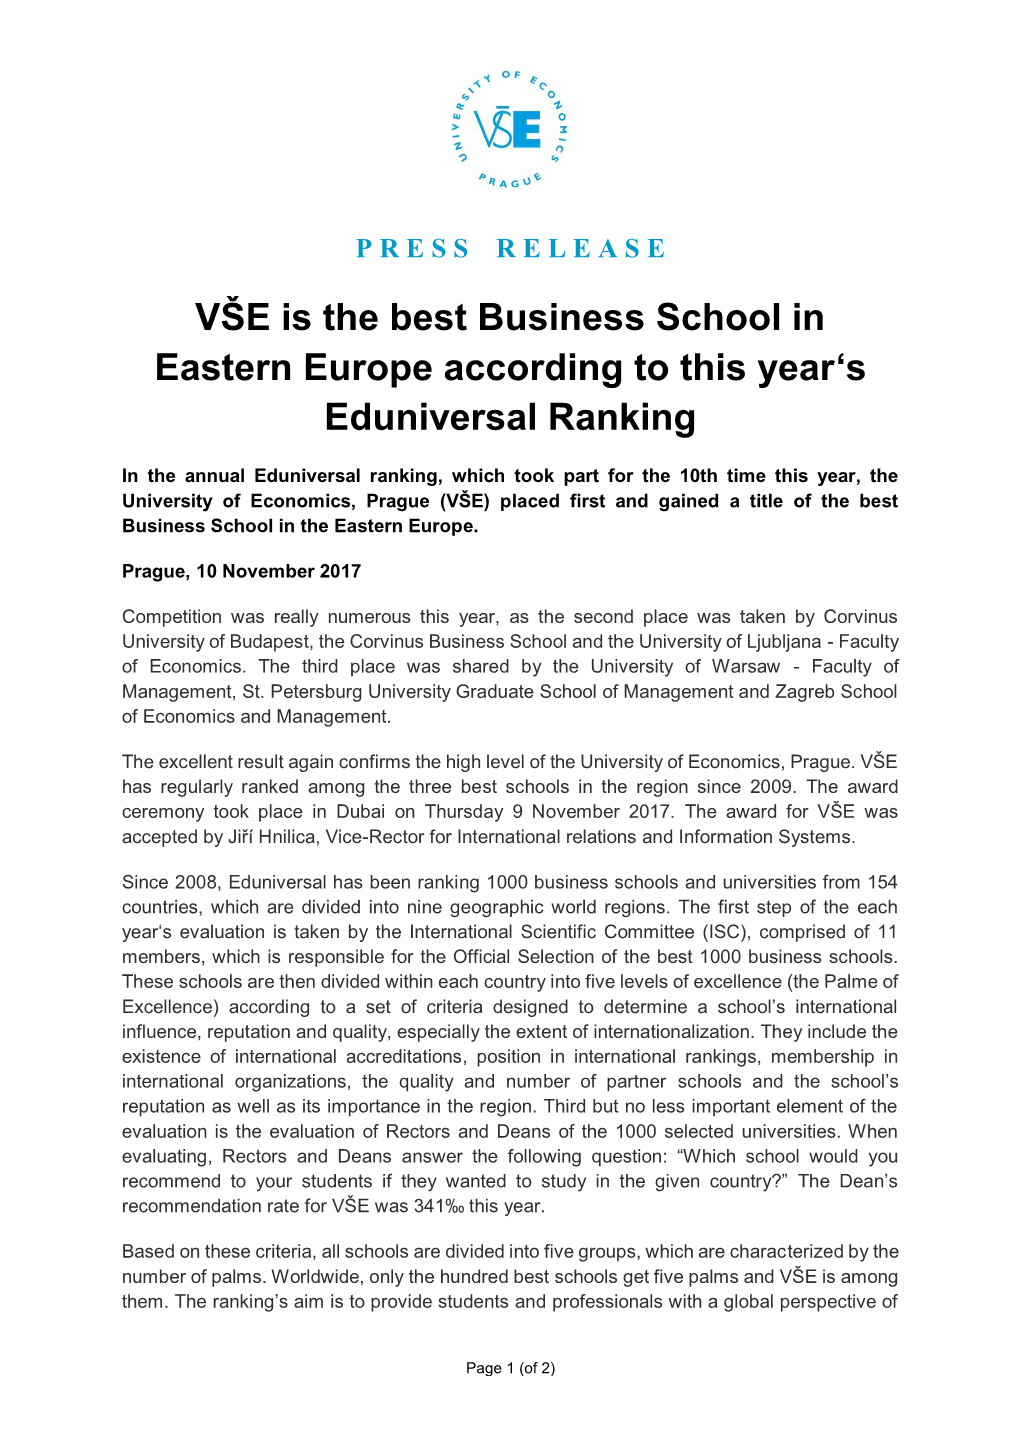 VŠE Is the Best Business School in Eastern Europe According to This Year‘S Eduniversal Ranking